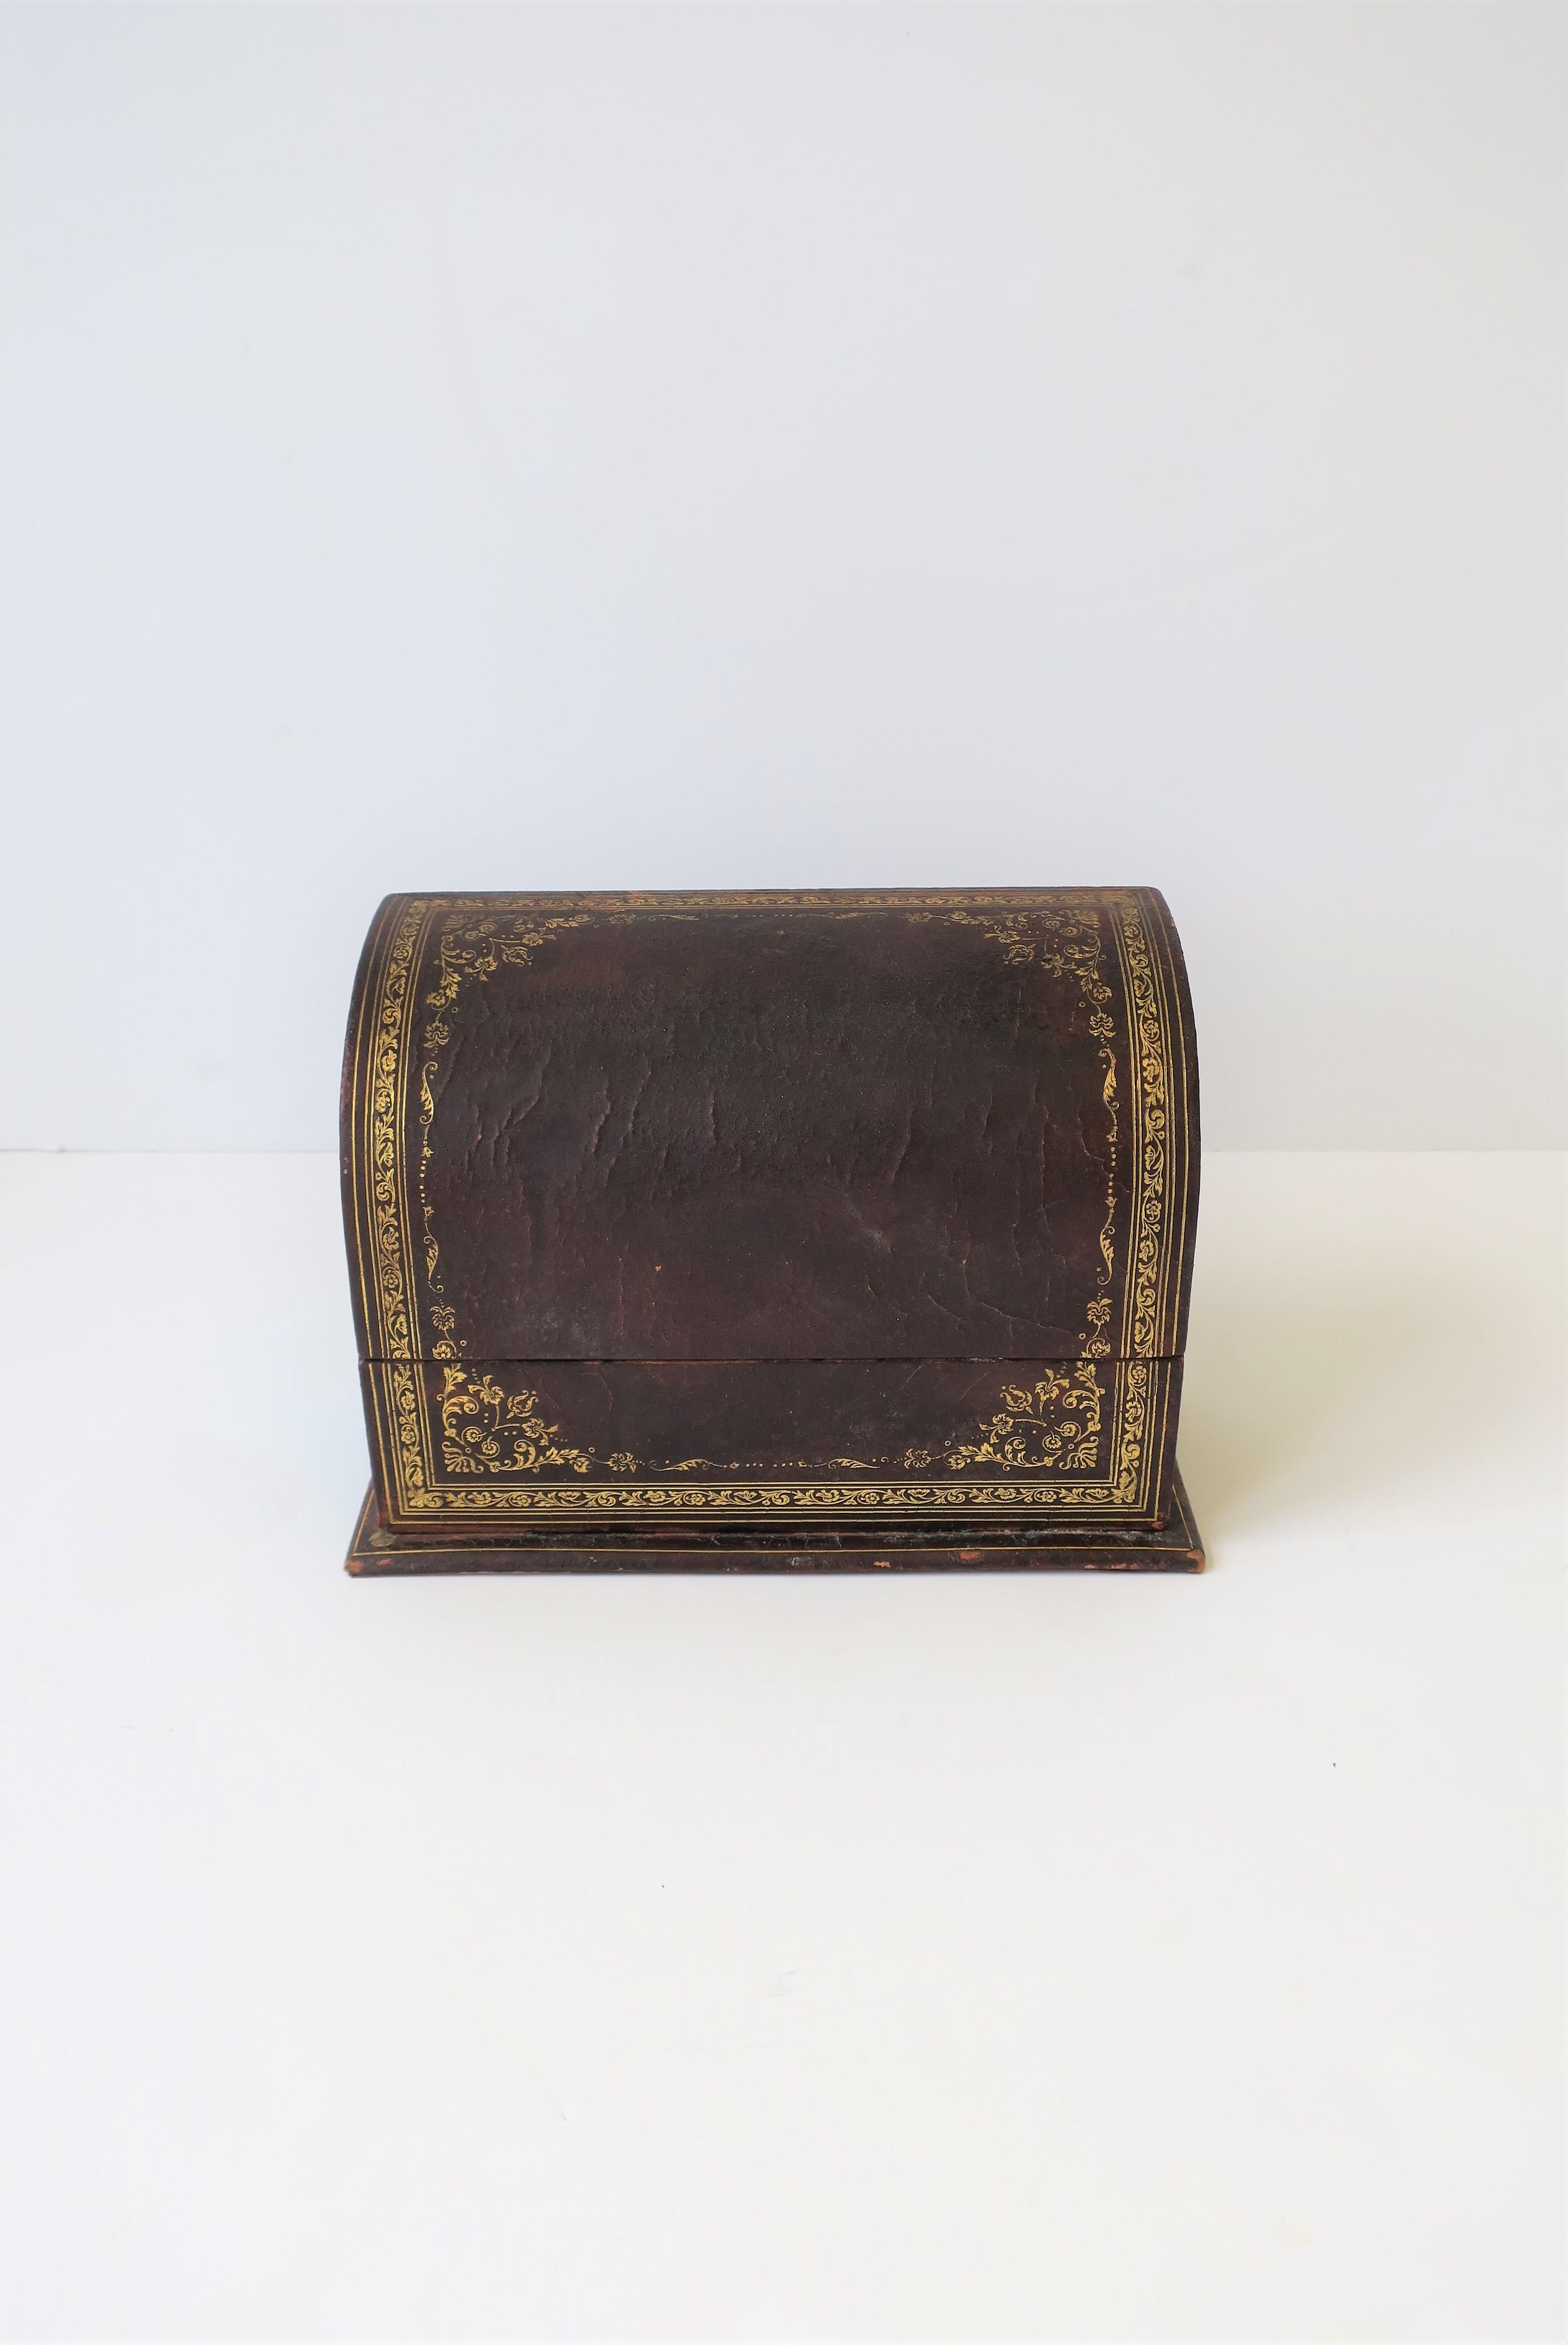 A vintage Italian leather Desk letter holder box with gold embossing, circa early to mid-20th Century, Italy.

Box measures: 4.5